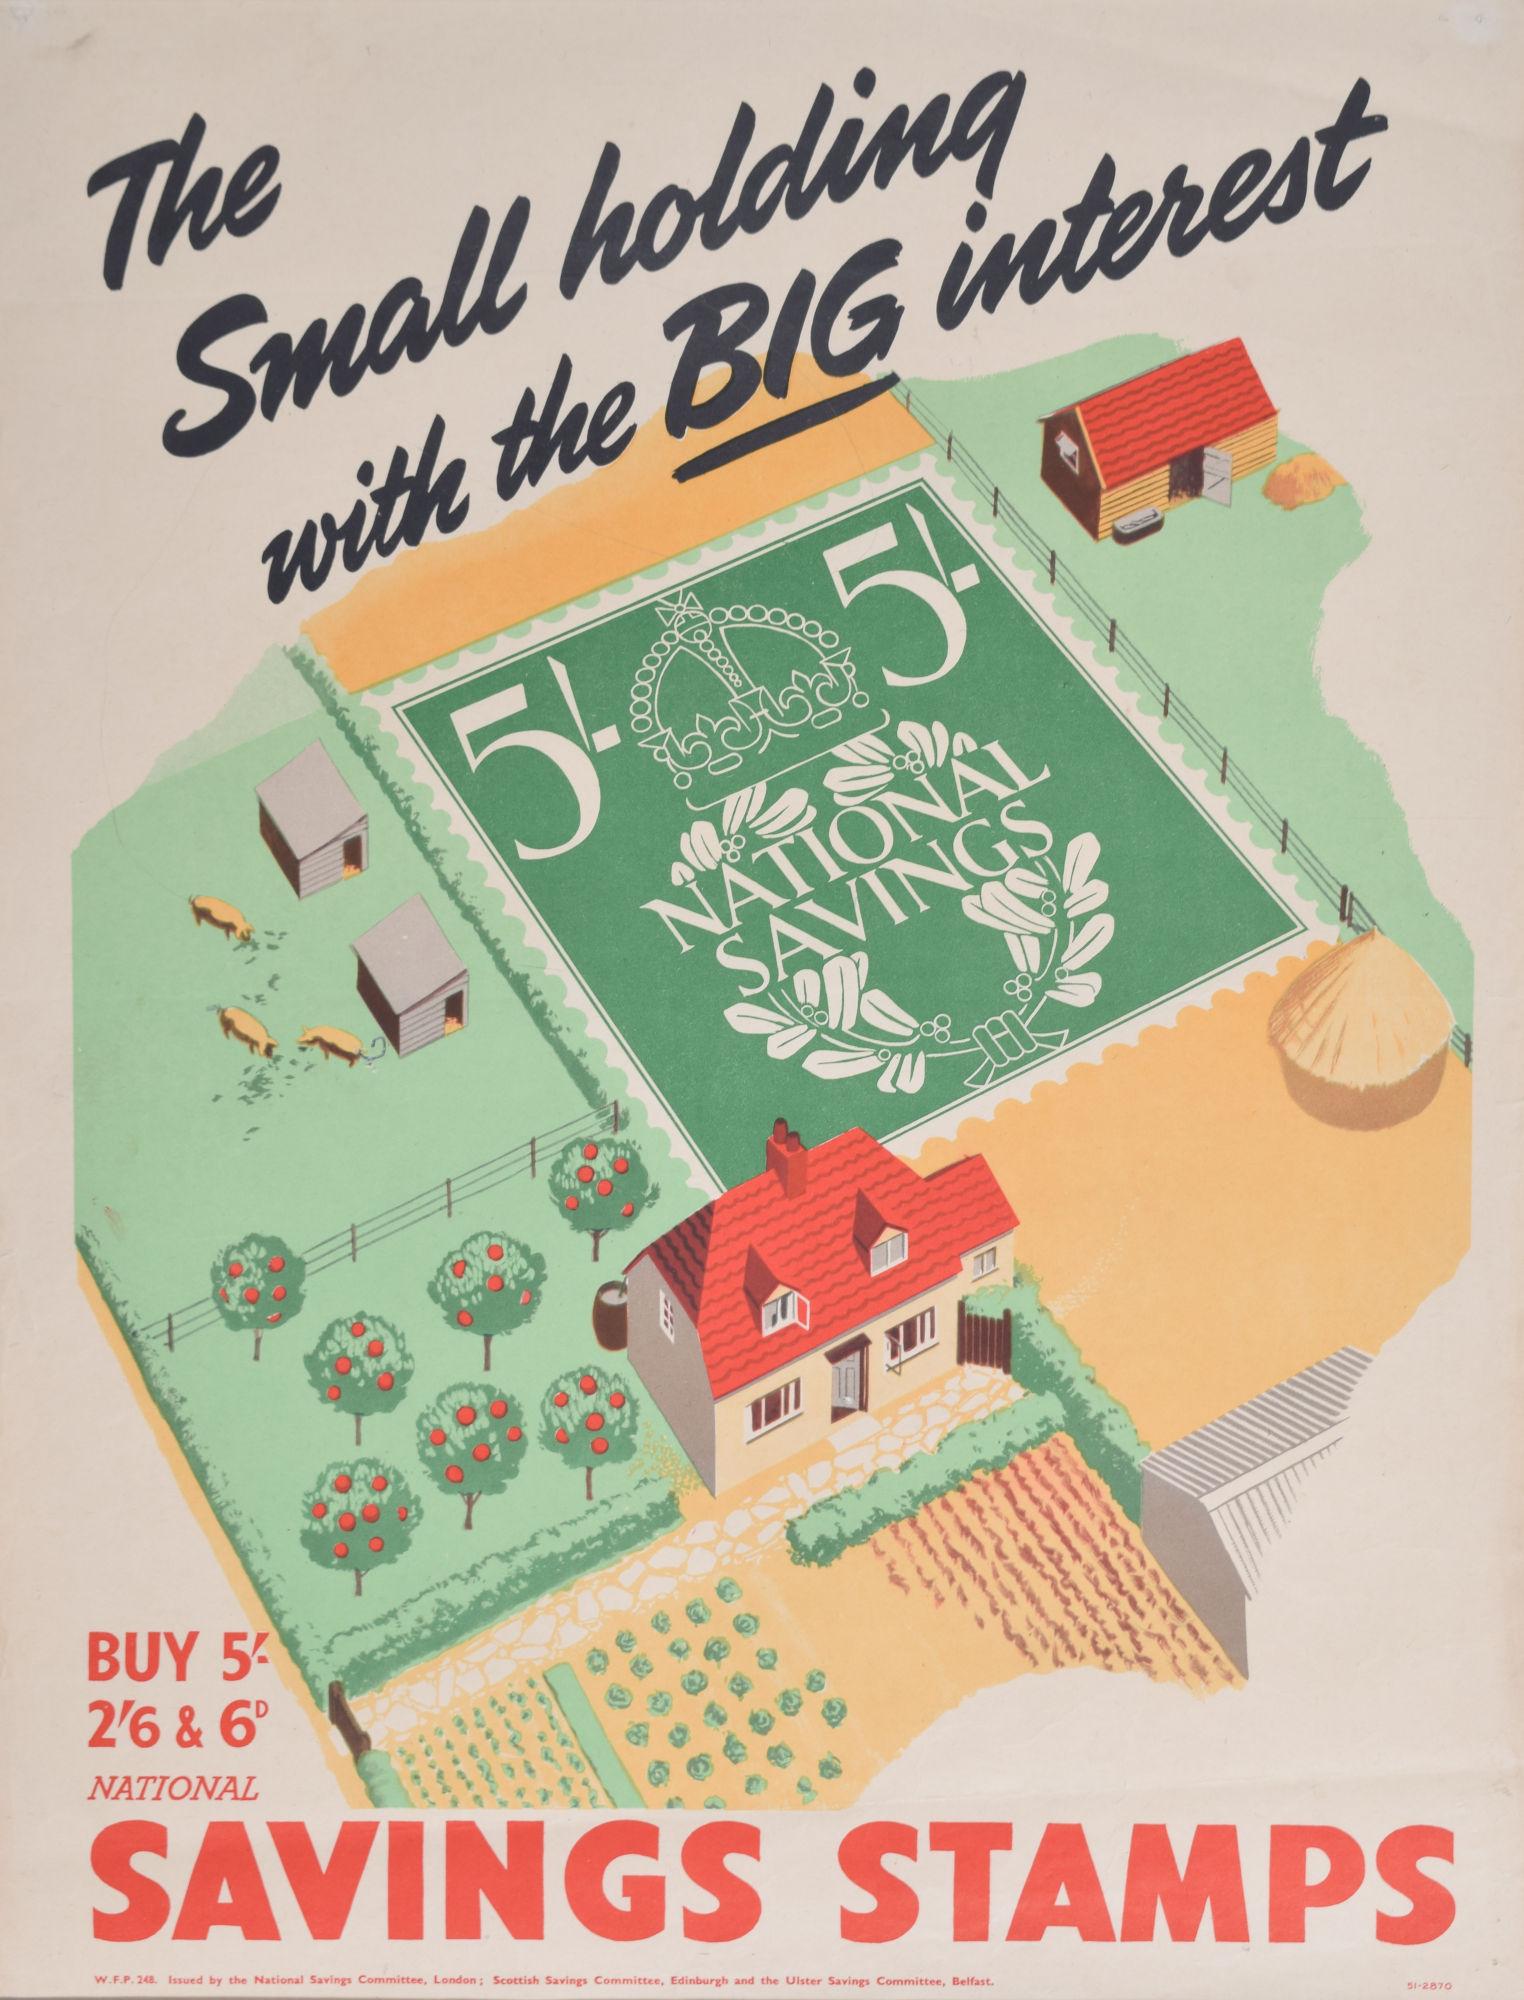 Savings Stamps - the Small Holding with the Big Interest original vintage poster - Print by Unknown